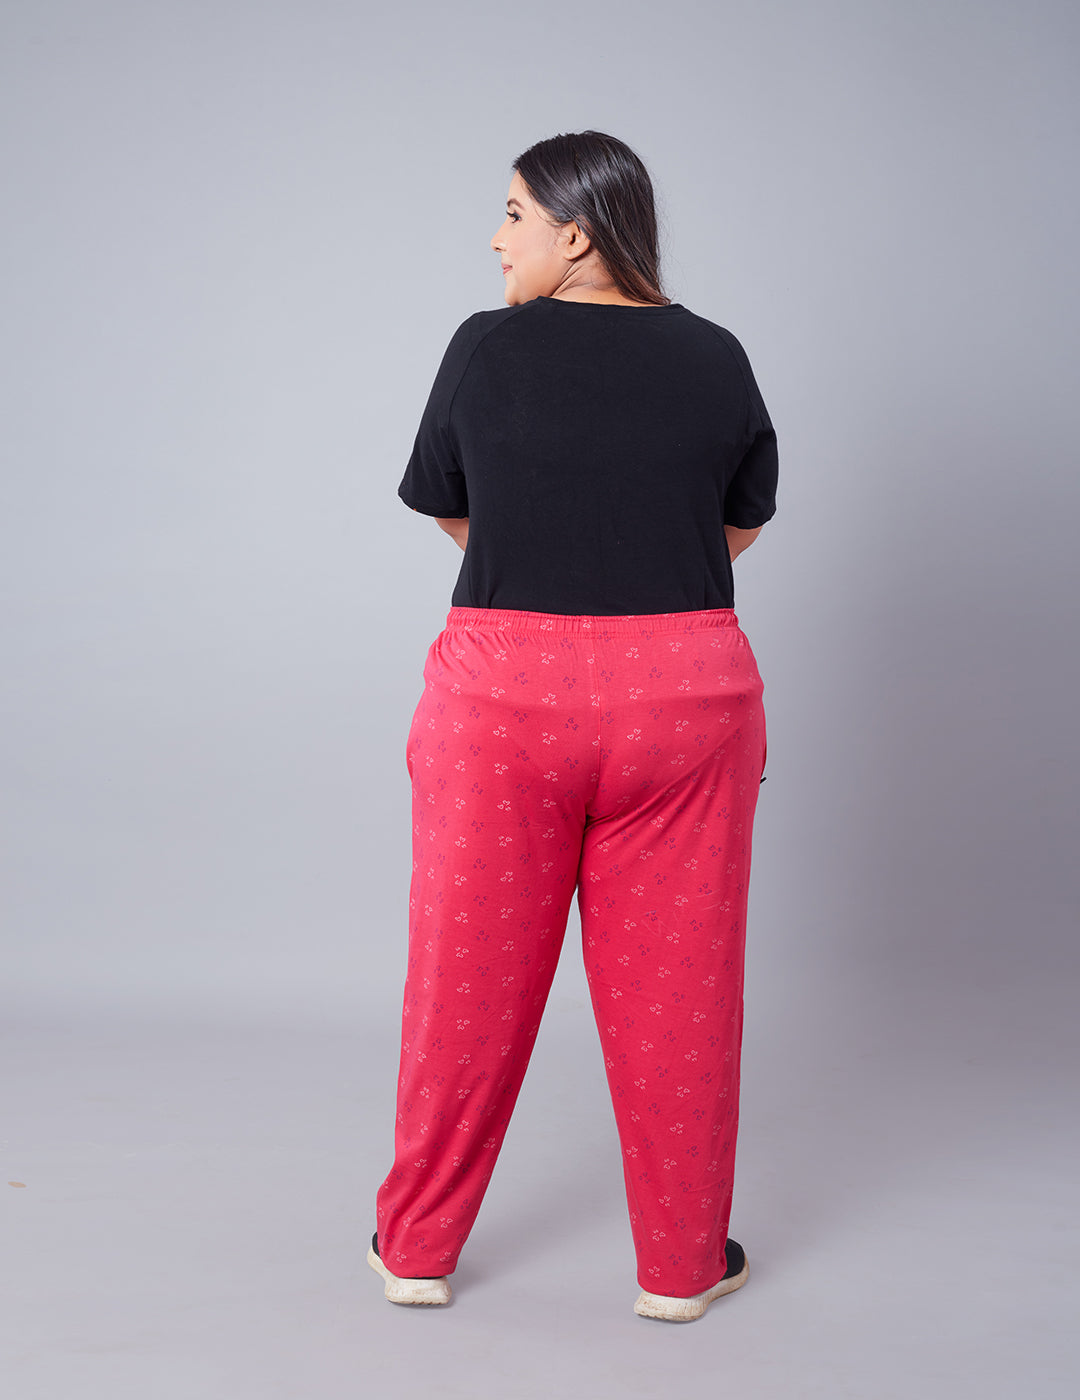 Women's Trousers - Stylish Trousers For Ladies | VILA Official® | Page 3